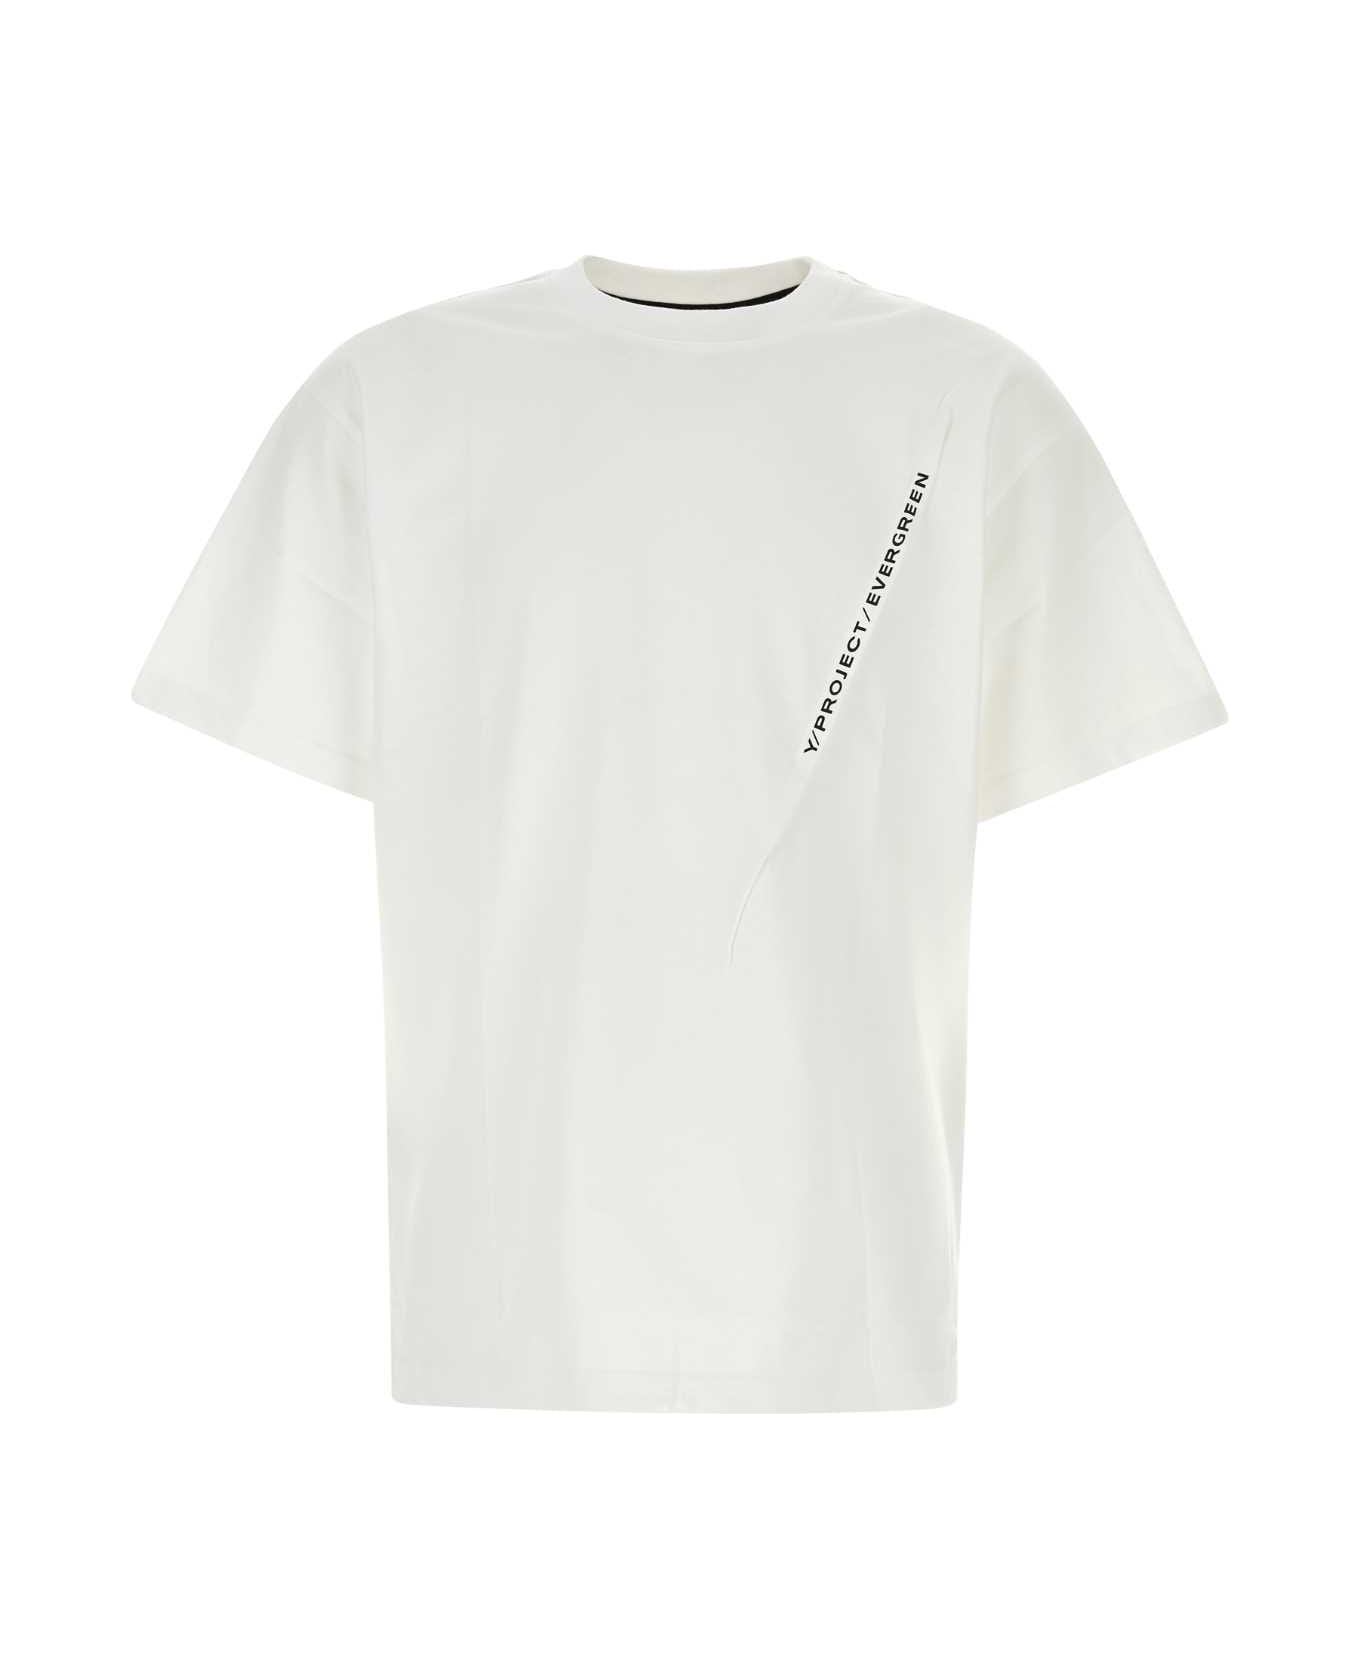 Y/Project White Cotton T-shirt - EVERGREEN OPTIC WHITE